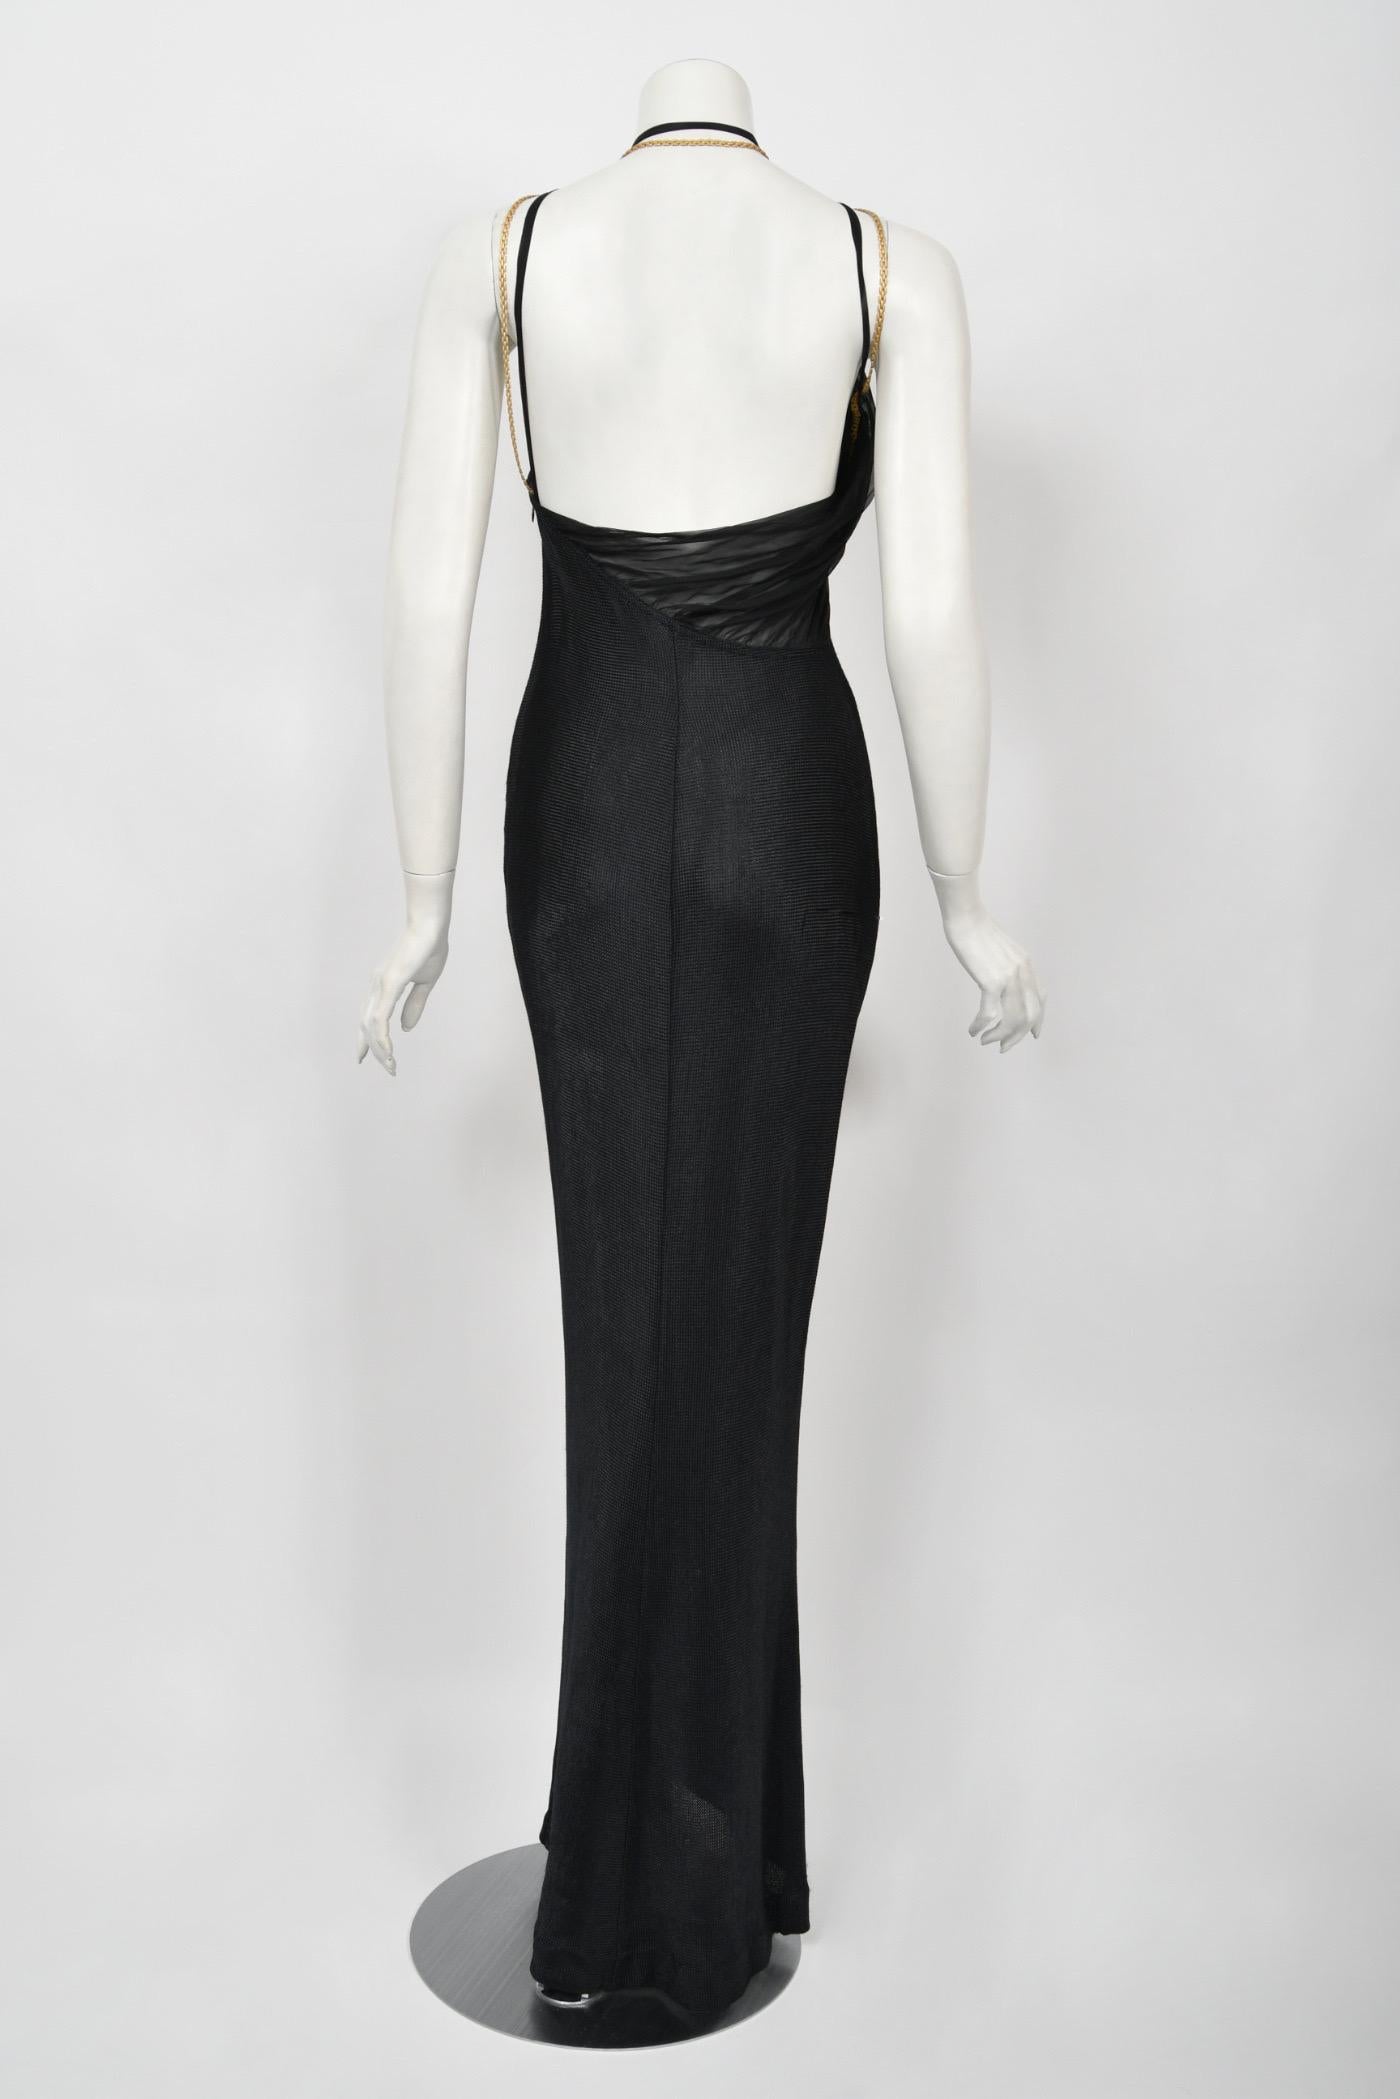 1998 Versace Couture Black Stretch Knit & Sheer Silk Cut-Out Hourglass Gown  7